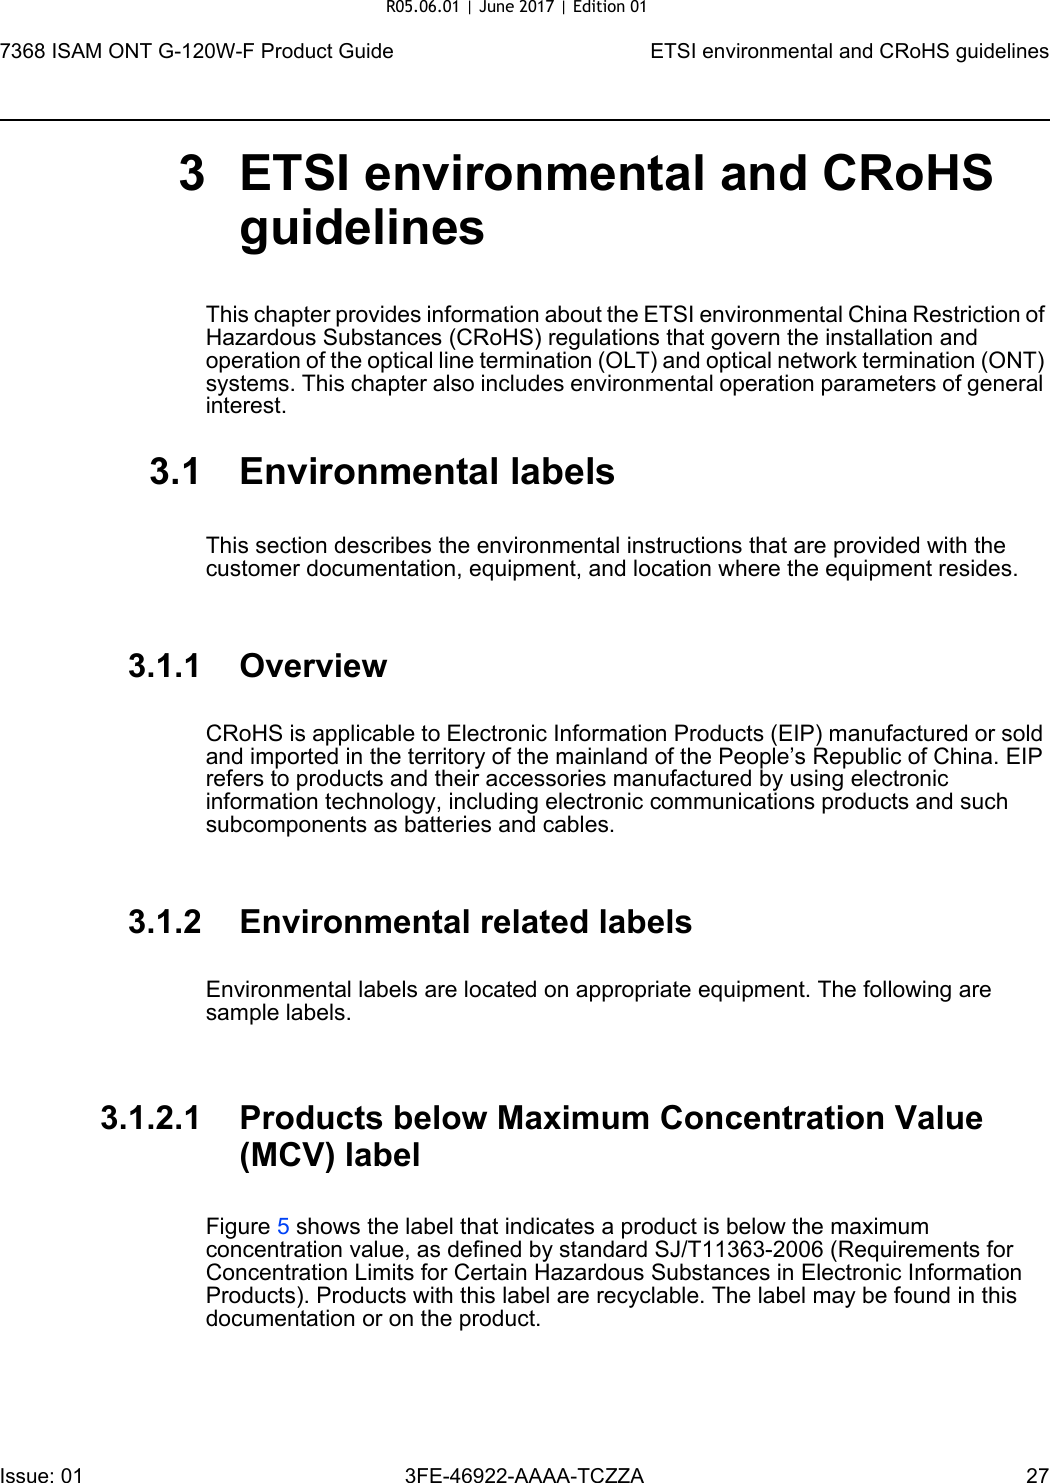 7368 ISAM ONT G-120W-F Product Guide ETSI environmental and CRoHS guidelinesIssue: 01 3FE-46922-AAAA-TCZZA 27 3 ETSI environmental and CRoHS guidelinesThis chapter provides information about the ETSI environmental China Restriction of Hazardous Substances (CRoHS) regulations that govern the installation and operation of the optical line termination (OLT) and optical network termination (ONT) systems. This chapter also includes environmental operation parameters of general interest.3.1 Environmental labelsThis section describes the environmental instructions that are provided with the customer documentation, equipment, and location where the equipment resides.3.1.1 OverviewCRoHS is applicable to Electronic Information Products (EIP) manufactured or sold and imported in the territory of the mainland of the People’s Republic of China. EIP refers to products and their accessories manufactured by using electronic information technology, including electronic communications products and such subcomponents as batteries and cables.3.1.2 Environmental related labelsEnvironmental labels are located on appropriate equipment. The following are sample labels.3.1.2.1 Products below Maximum Concentration Value (MCV) labelFigure 5 shows the label that indicates a product is below the maximum concentration value, as defined by standard SJ/T11363-2006 (Requirements for Concentration Limits for Certain Hazardous Substances in Electronic Information Products). Products with this label are recyclable. The label may be found in this documentation or on the product.R05.06.01 | June 2017 | Edition 01 